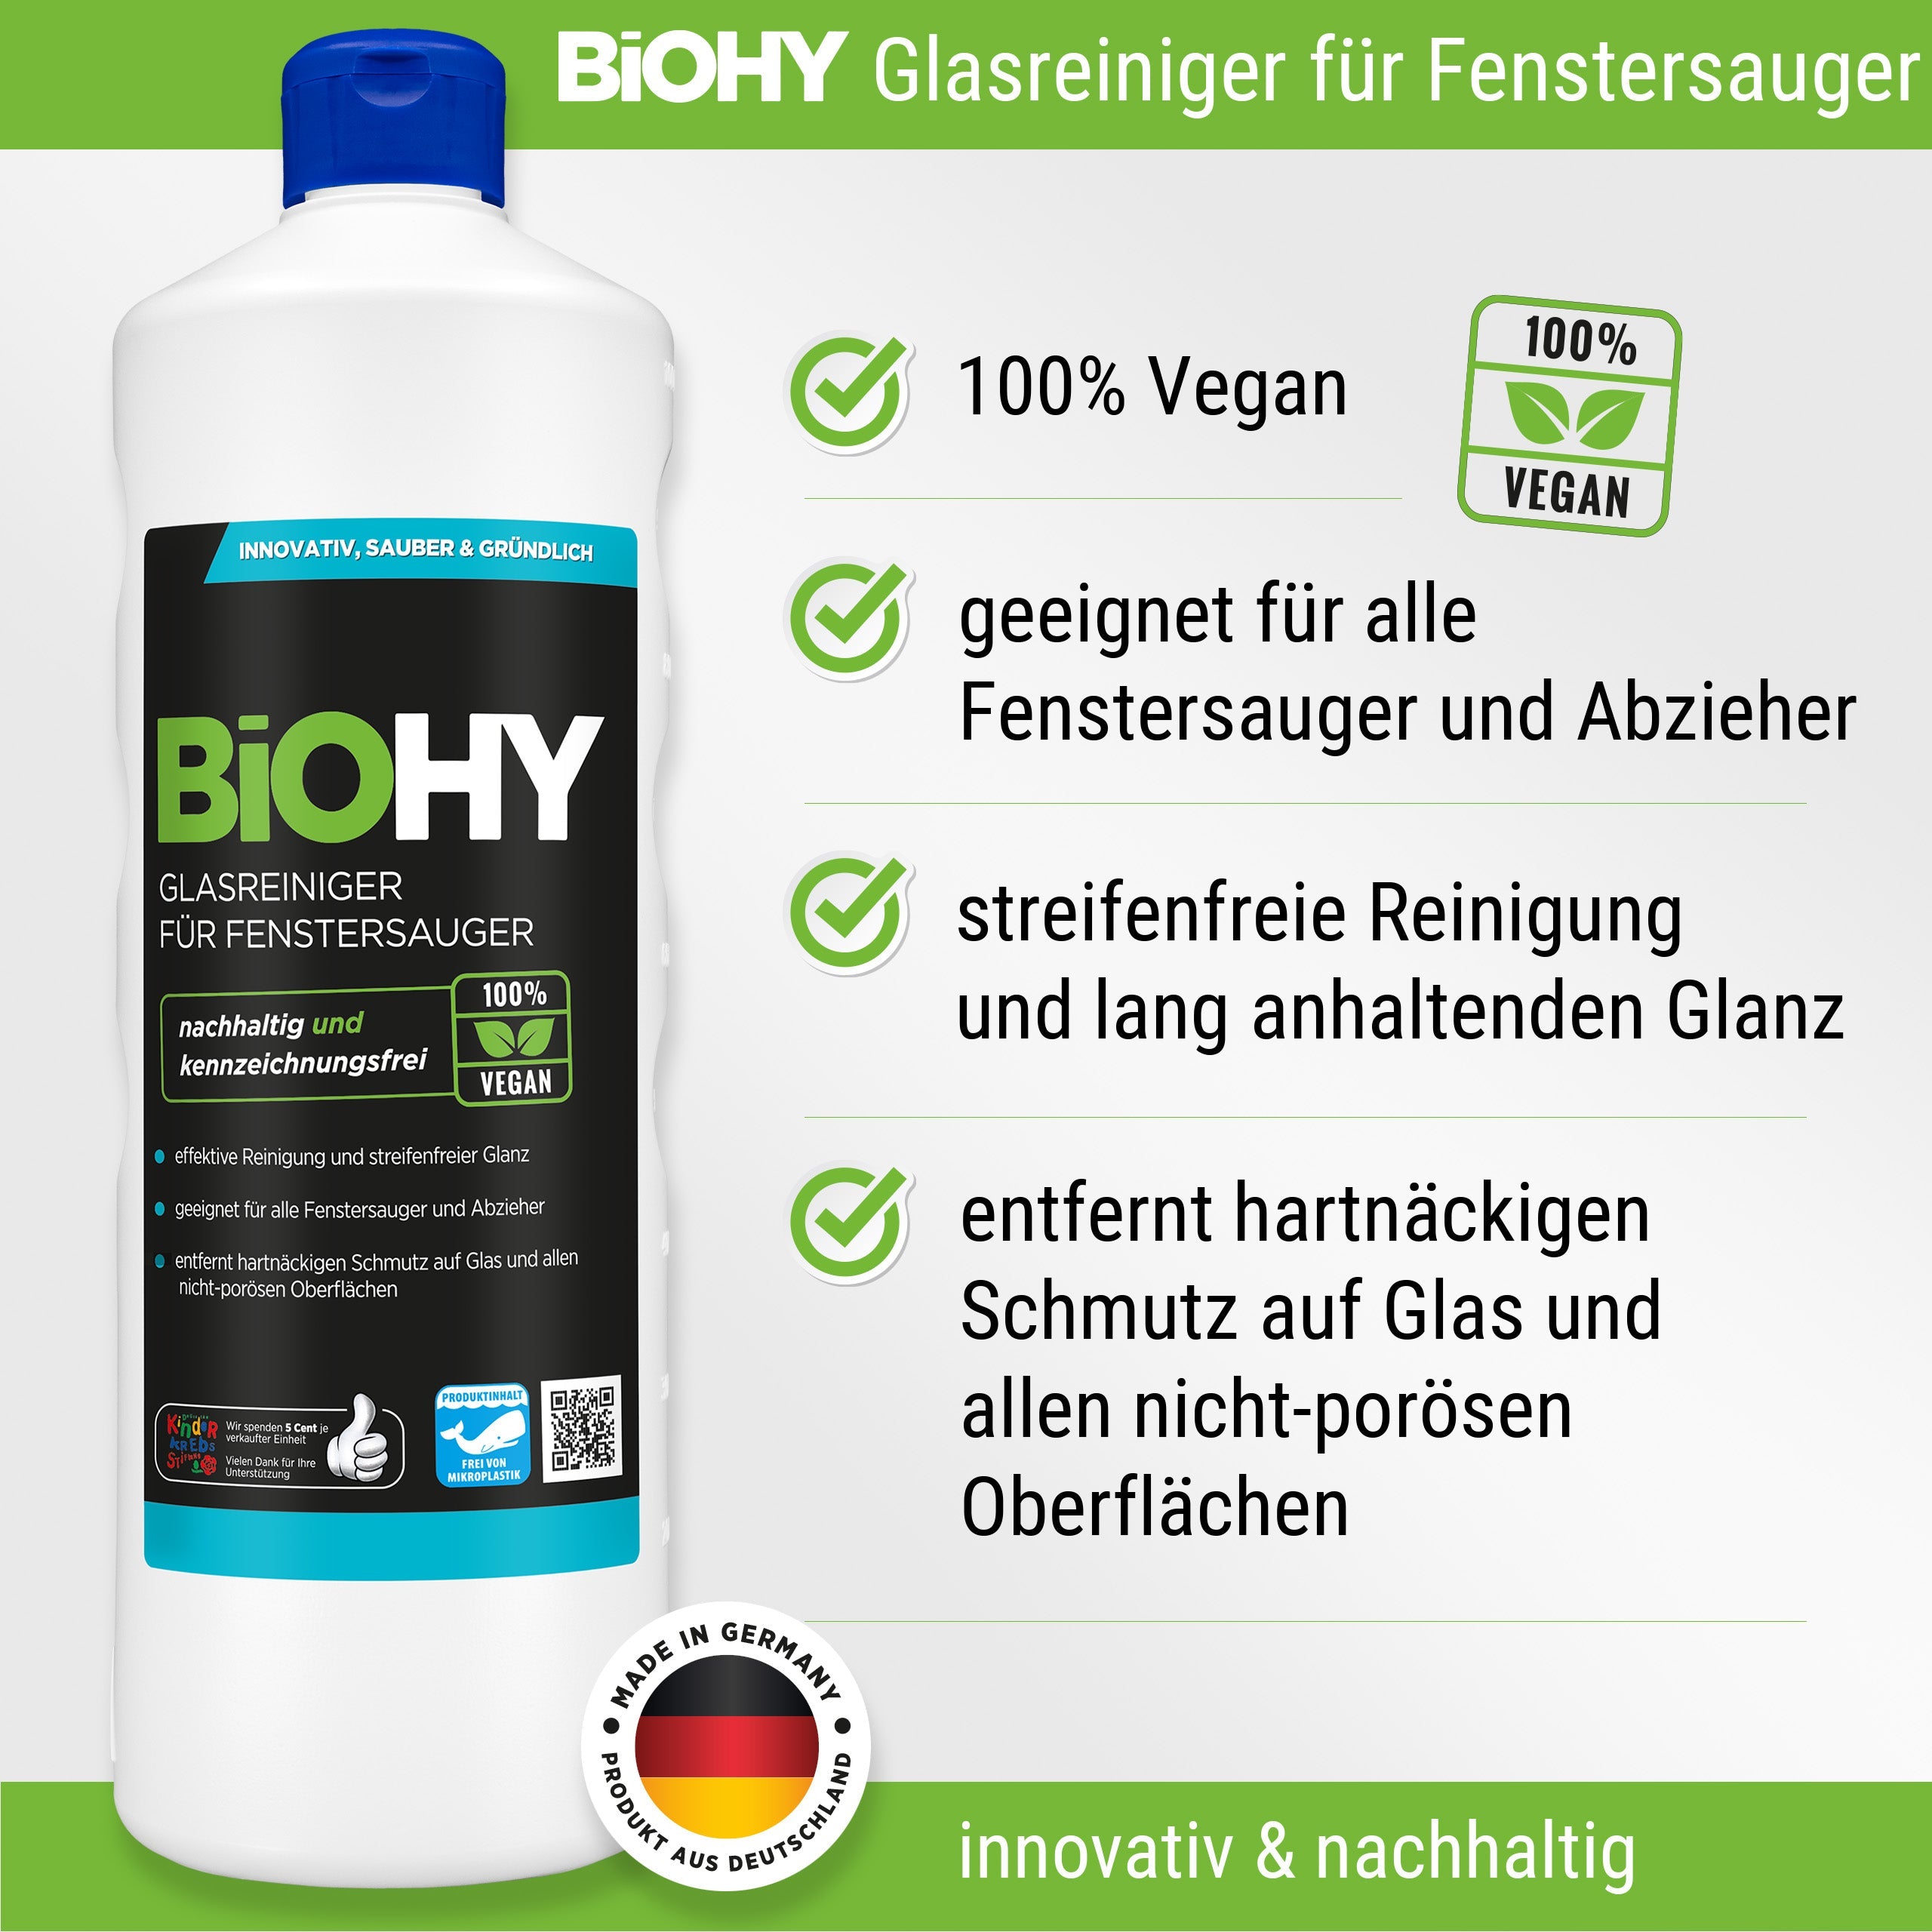 BiOHY glass cleaner for window vacuums, window cleaning agents, glass cleaners, window cleaners